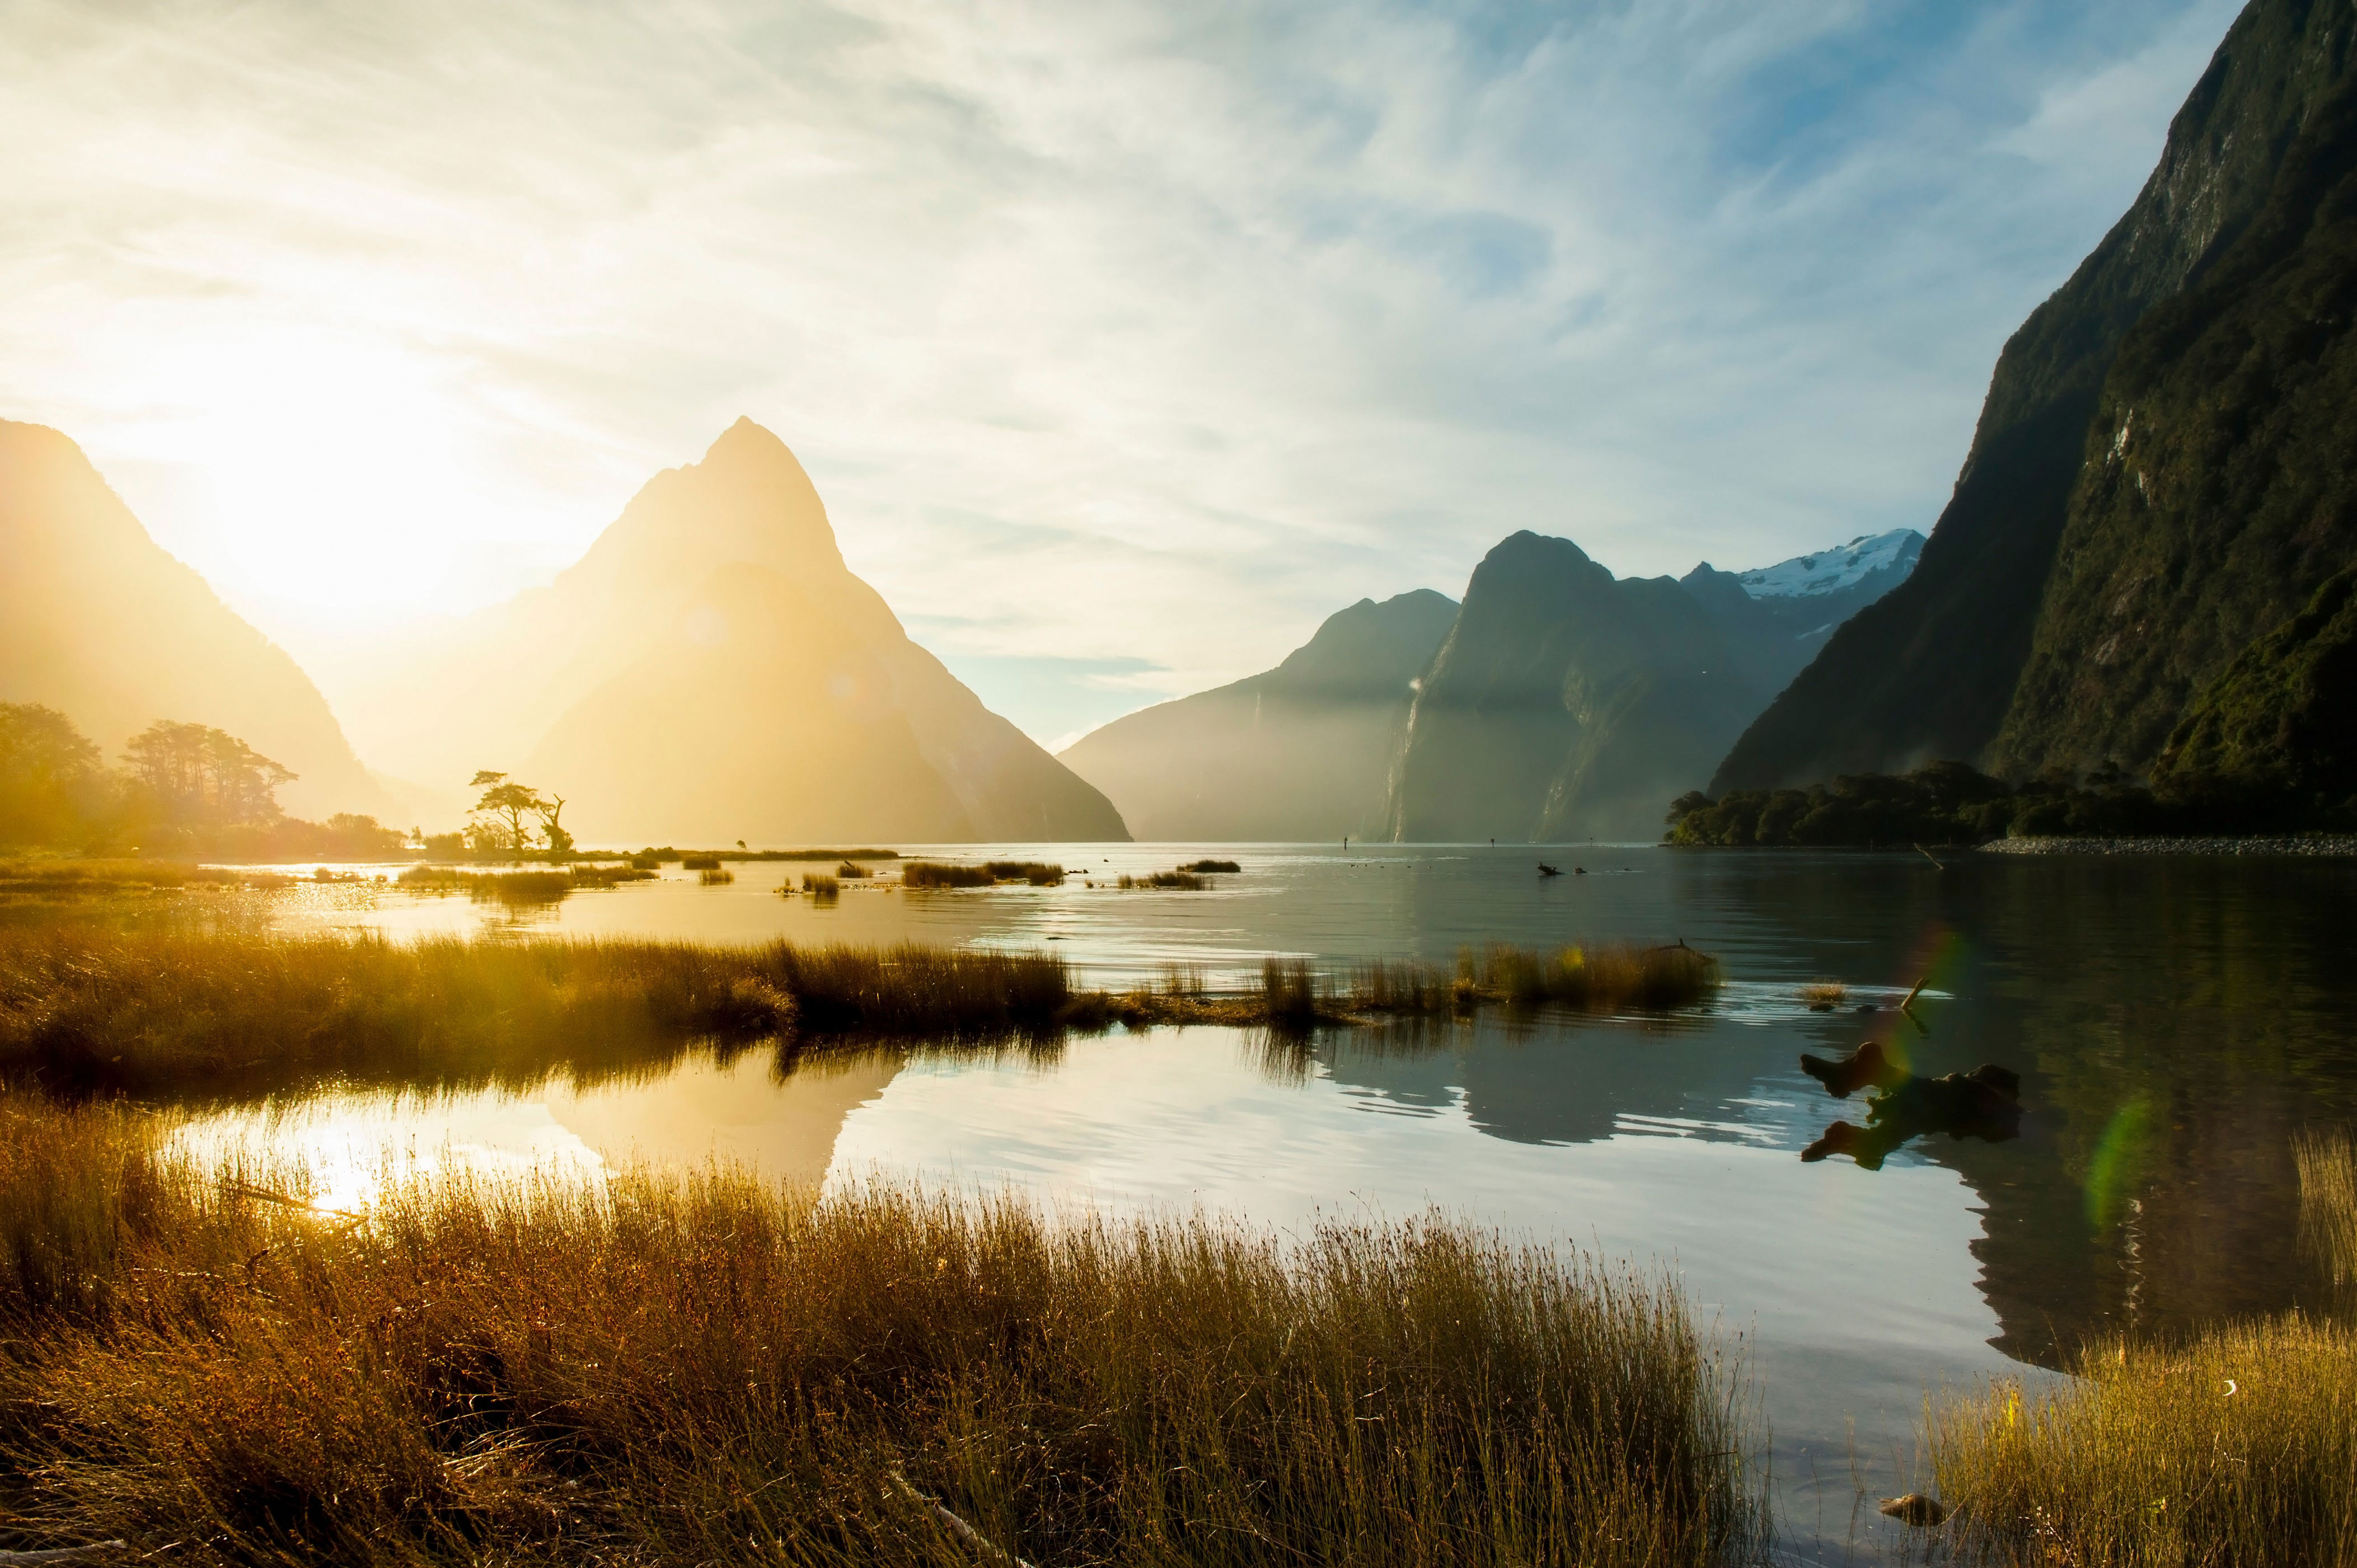 New Zealand is no stranger to breathtaking landscapes, particularly on the west coast of the South Island. Case in point: Milford Sound, a mountainous fjord where you can live out all of your <em>Lord of the Rings</em> fantasies.<p>Sign up to receive the latest news, expert tips, and inspiration on all things travel</p><a href="https://www.cntraveler.com/newsletter/the-daily?sourceCode=msnsend">Inspire Me</a>